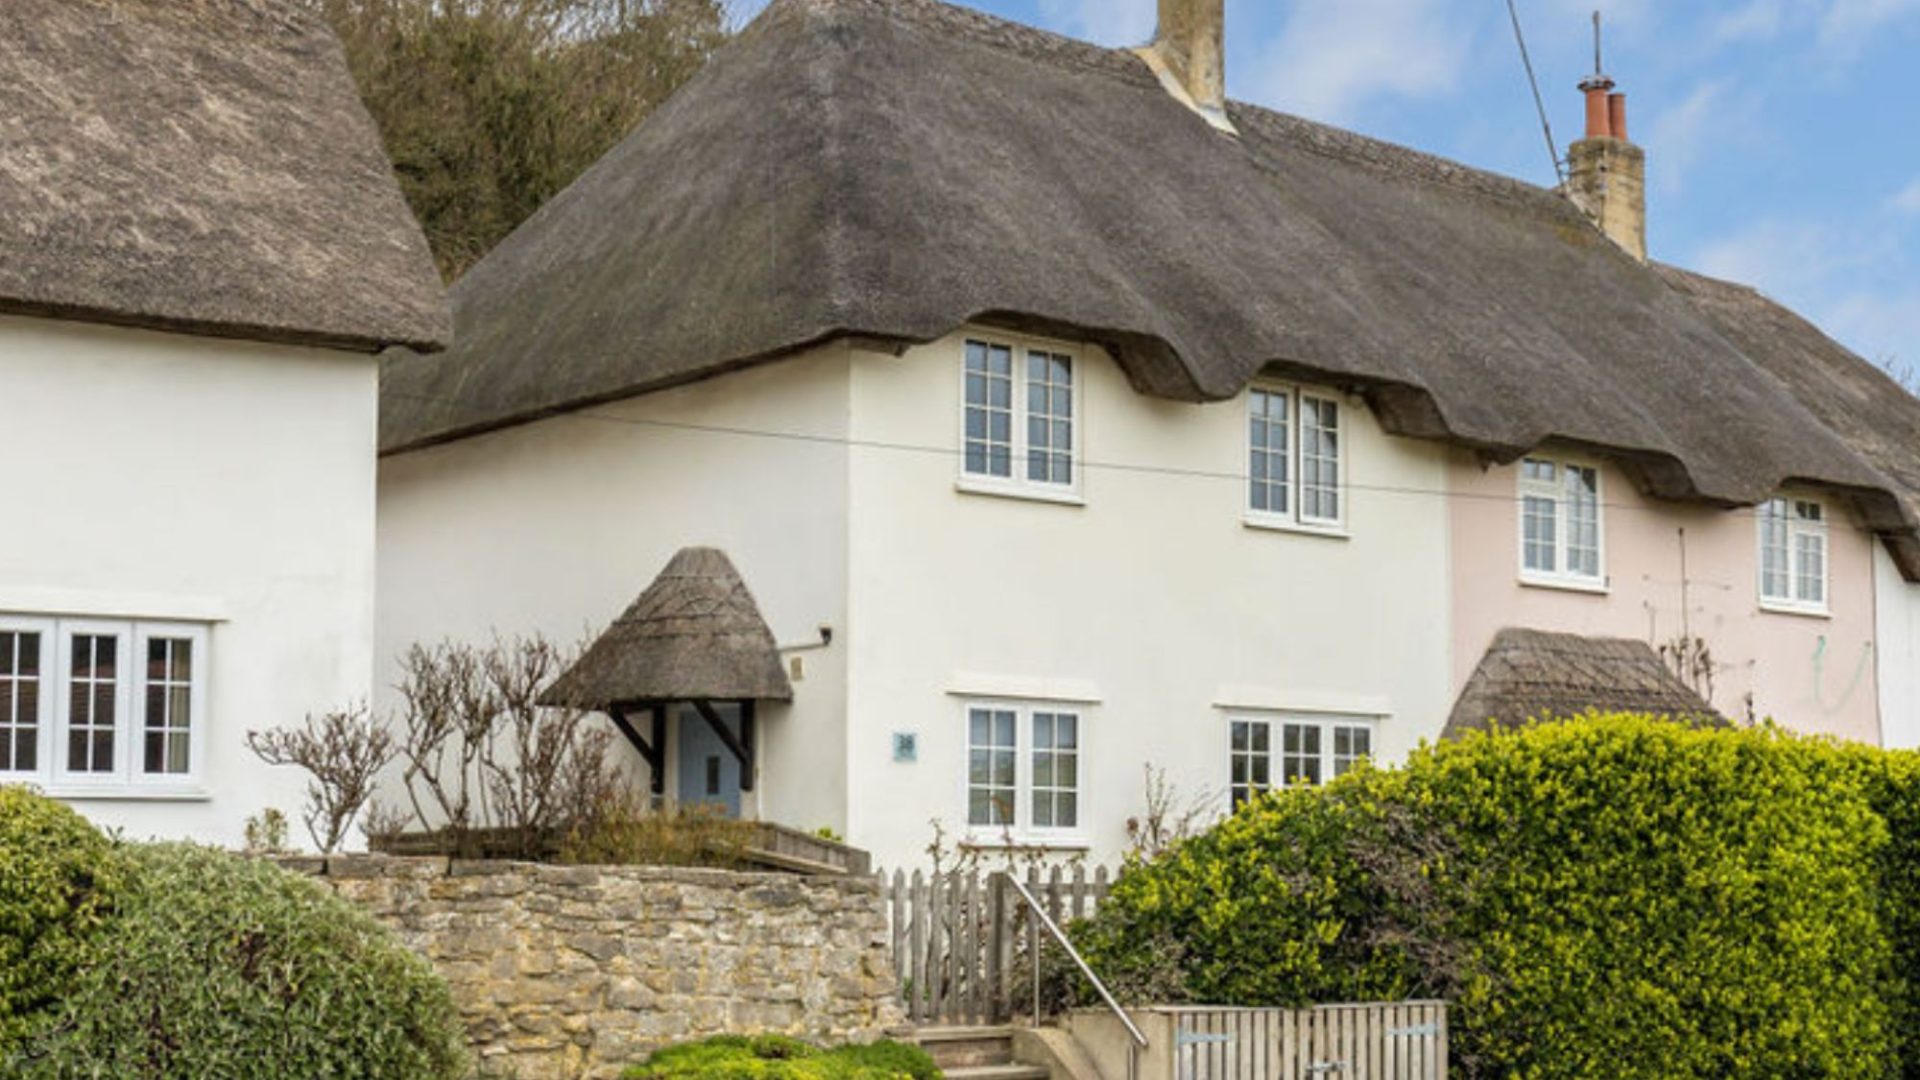 Thatched Holiday Cottage in Dorset